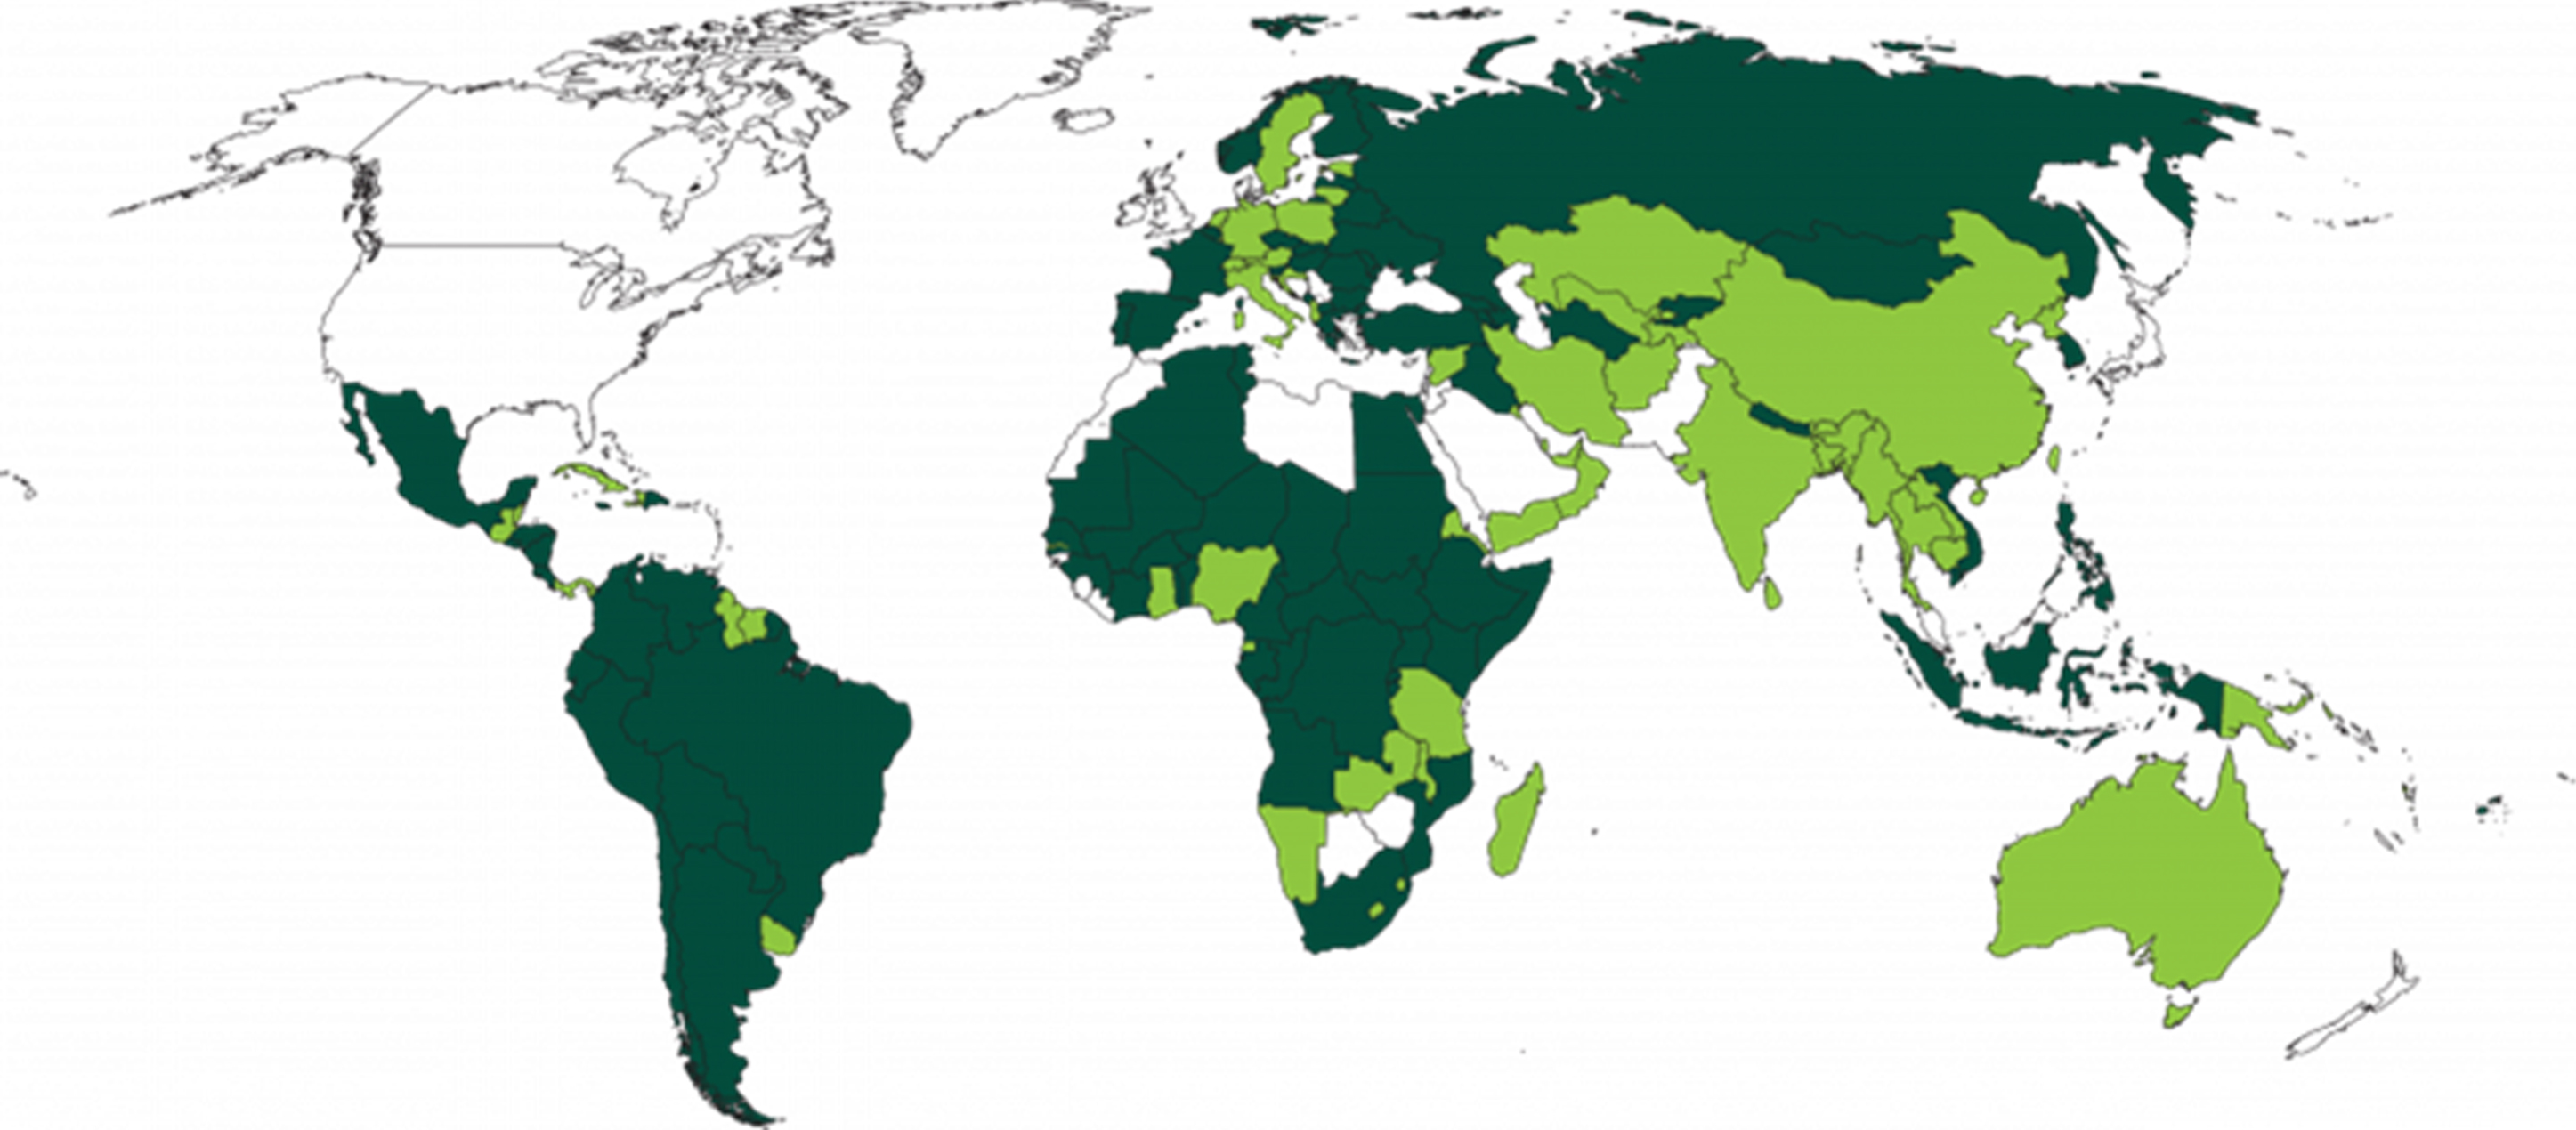 The right to a healthy environment. Dark green shows countries which have Constitutionally protected the right to a healthy environment. In light green are countries with constitutional provisions for a healthy environment.